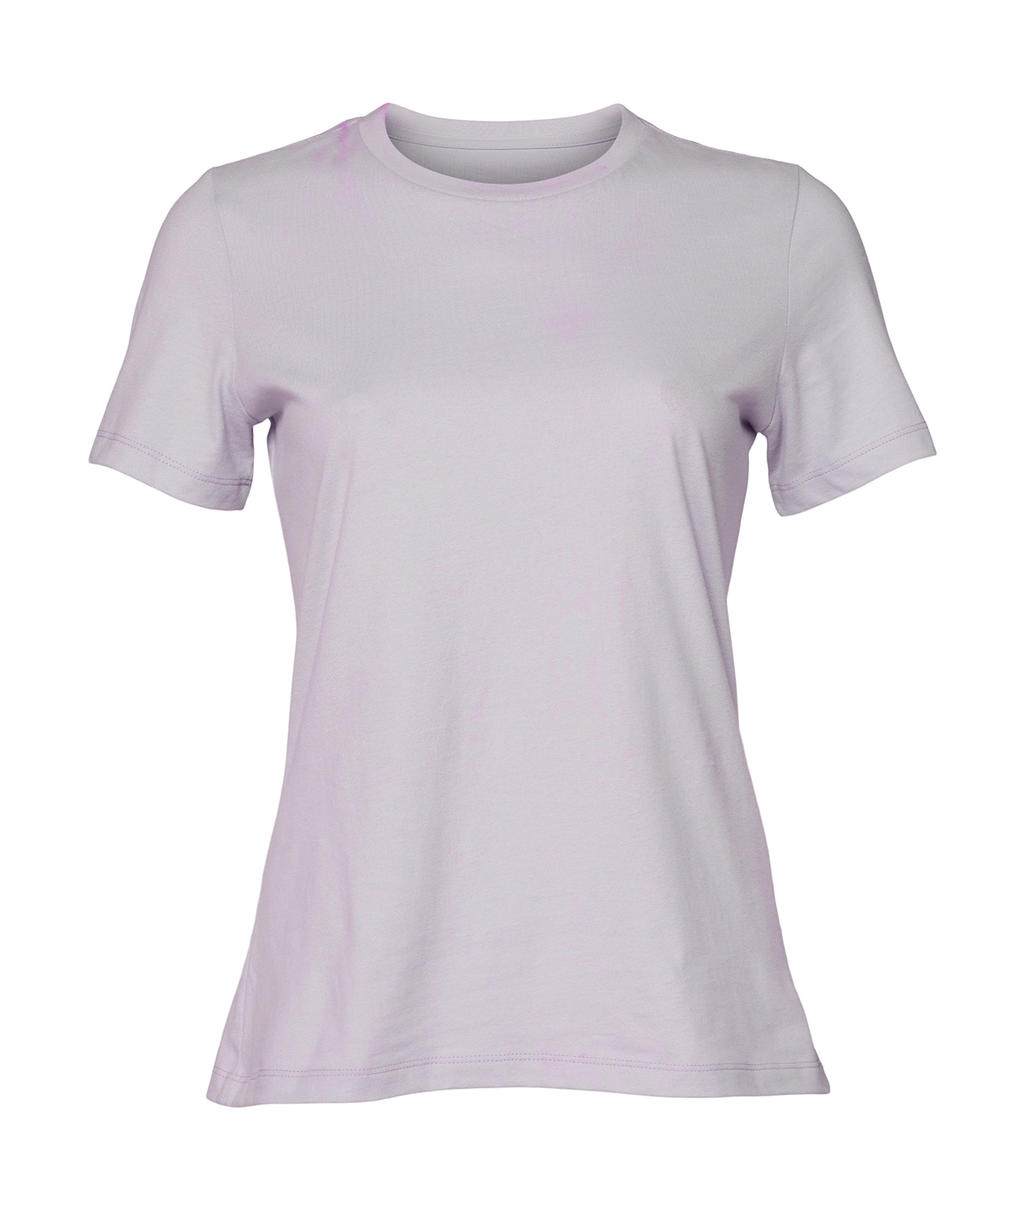  Womens Relaxed Jersey Short Sleeve Tee in Farbe Lavender Dust